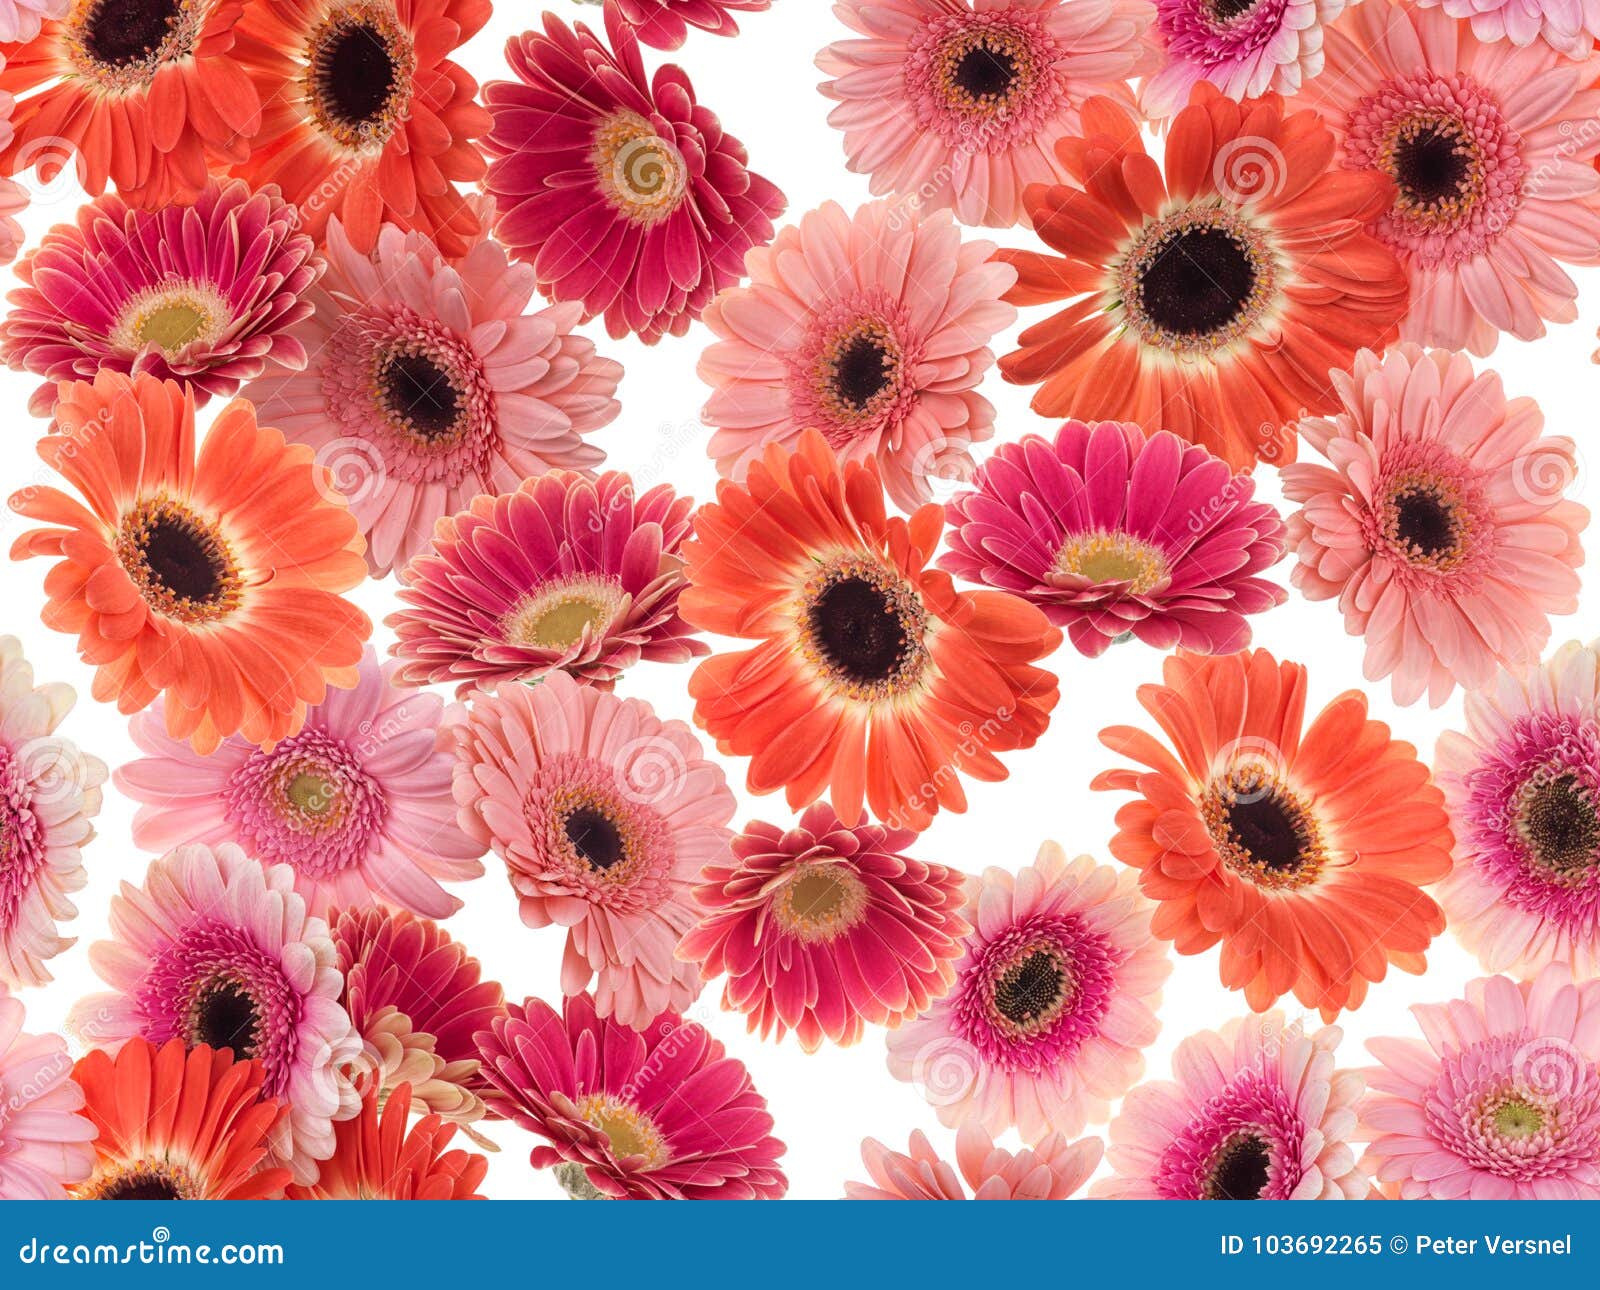 photographed pink/purple/orange gerber daisies on a white background. seamless image to be repeated endlessly.